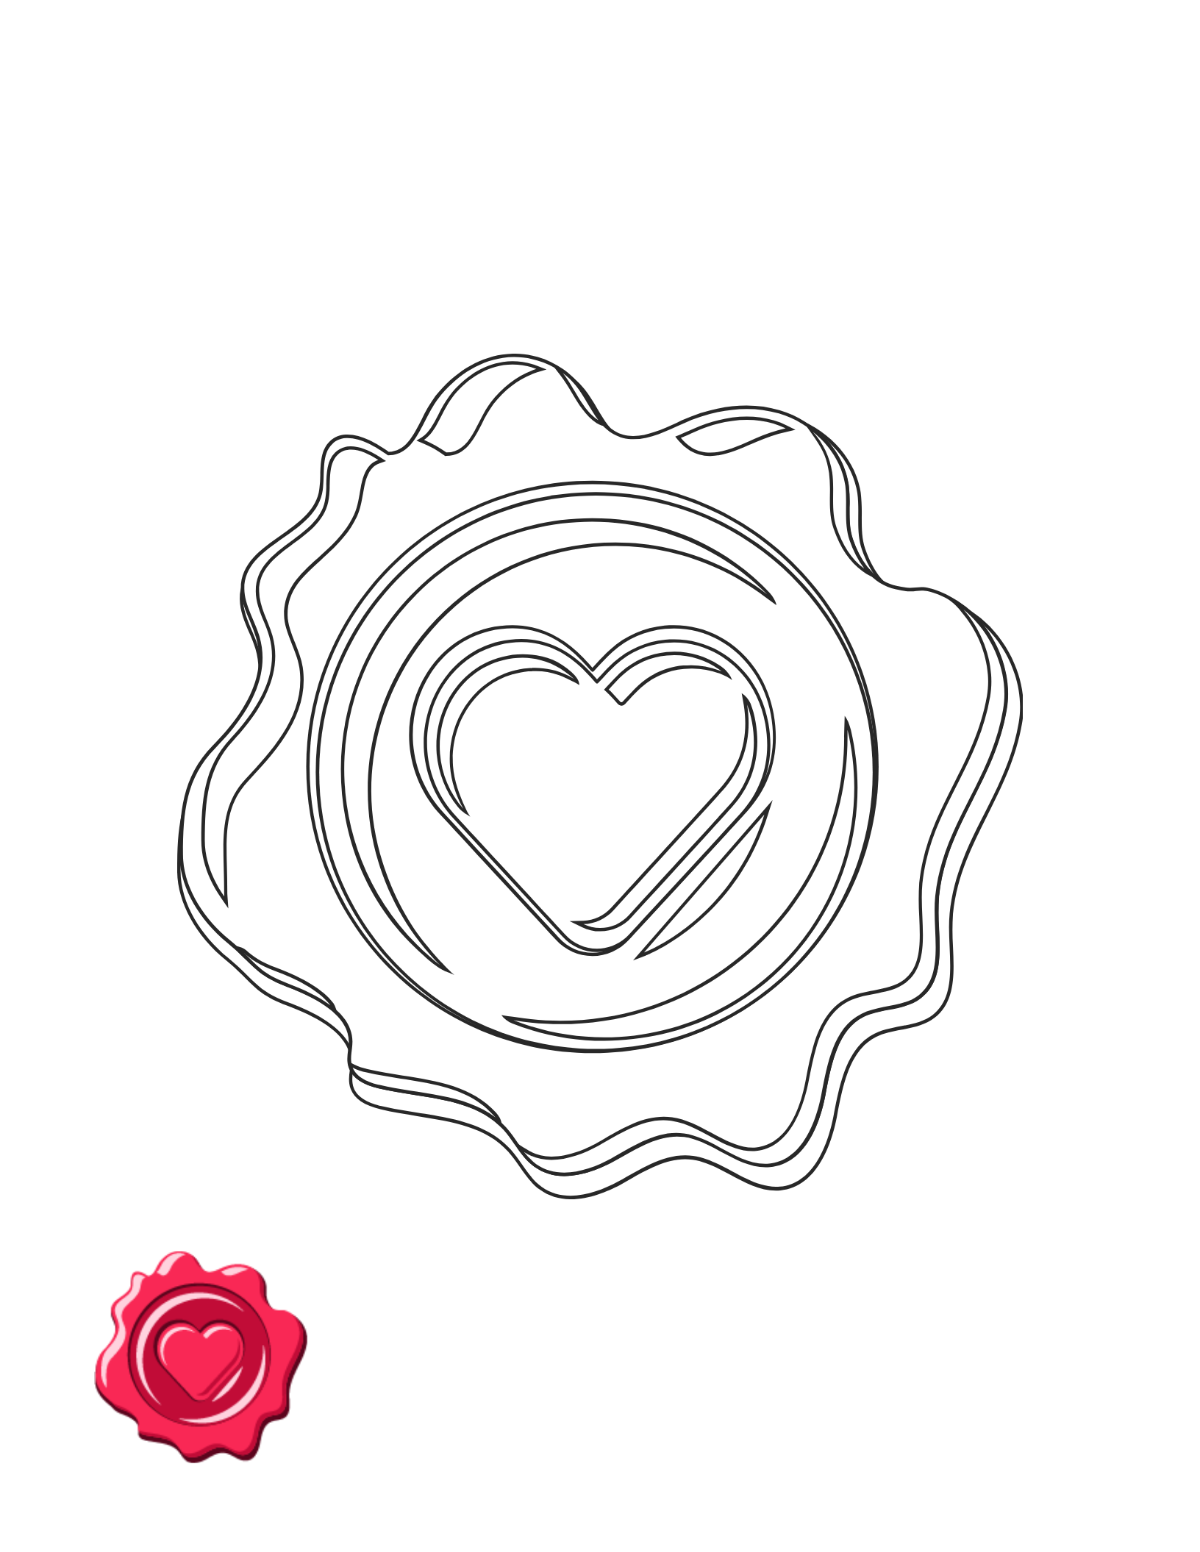 3D Heart Stamp Coloring Page Template